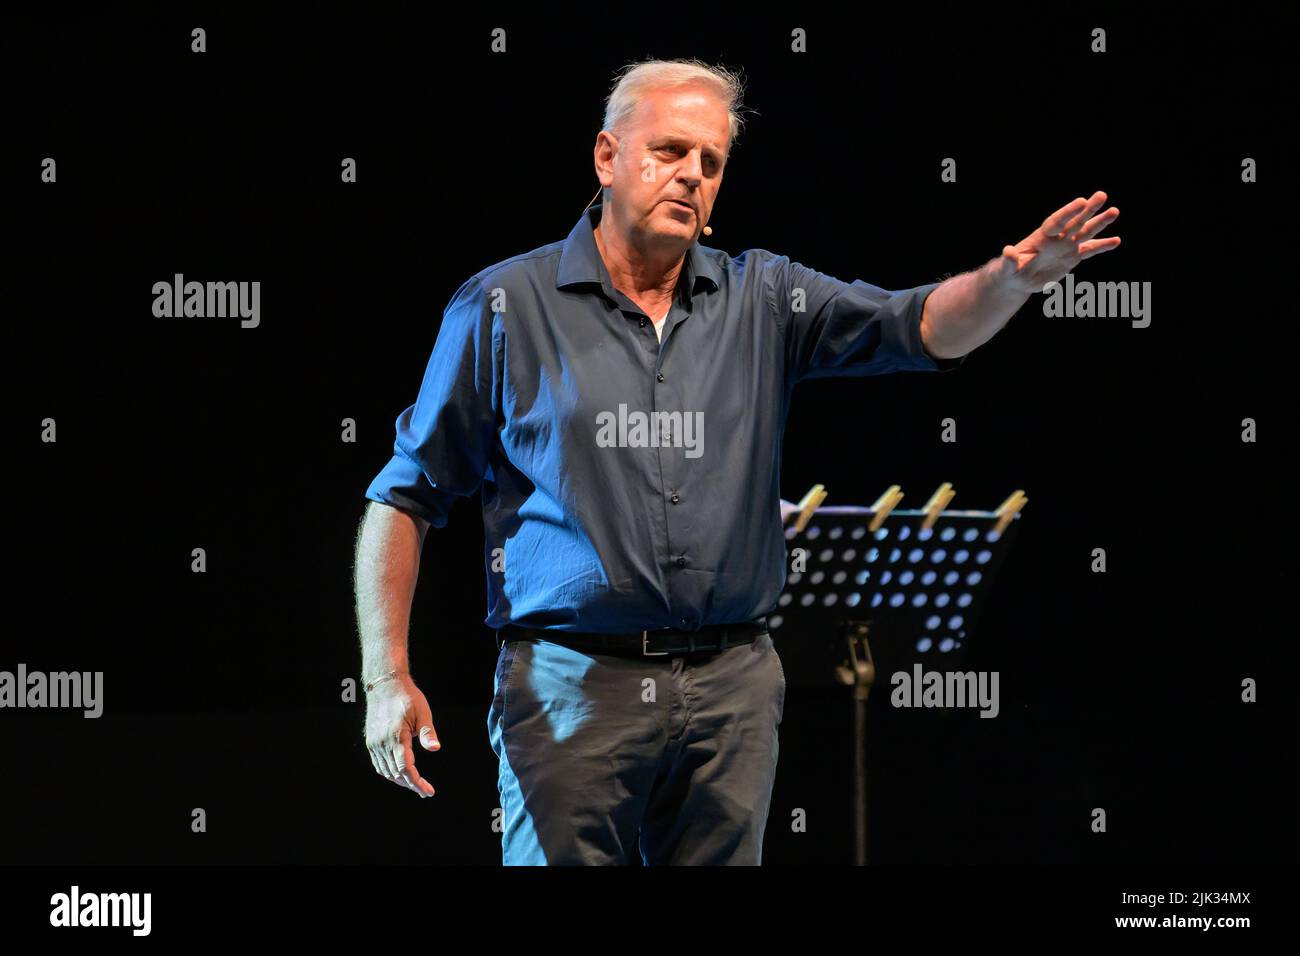 Camaiore, Italy. 29 July, 2022. Enrico Bertolino performs with his show on the stage of the Giorgio Gaber Festival in front of the Camaiore audience. Stefano Dalle Luche / Alamy Live News. Stock Photo